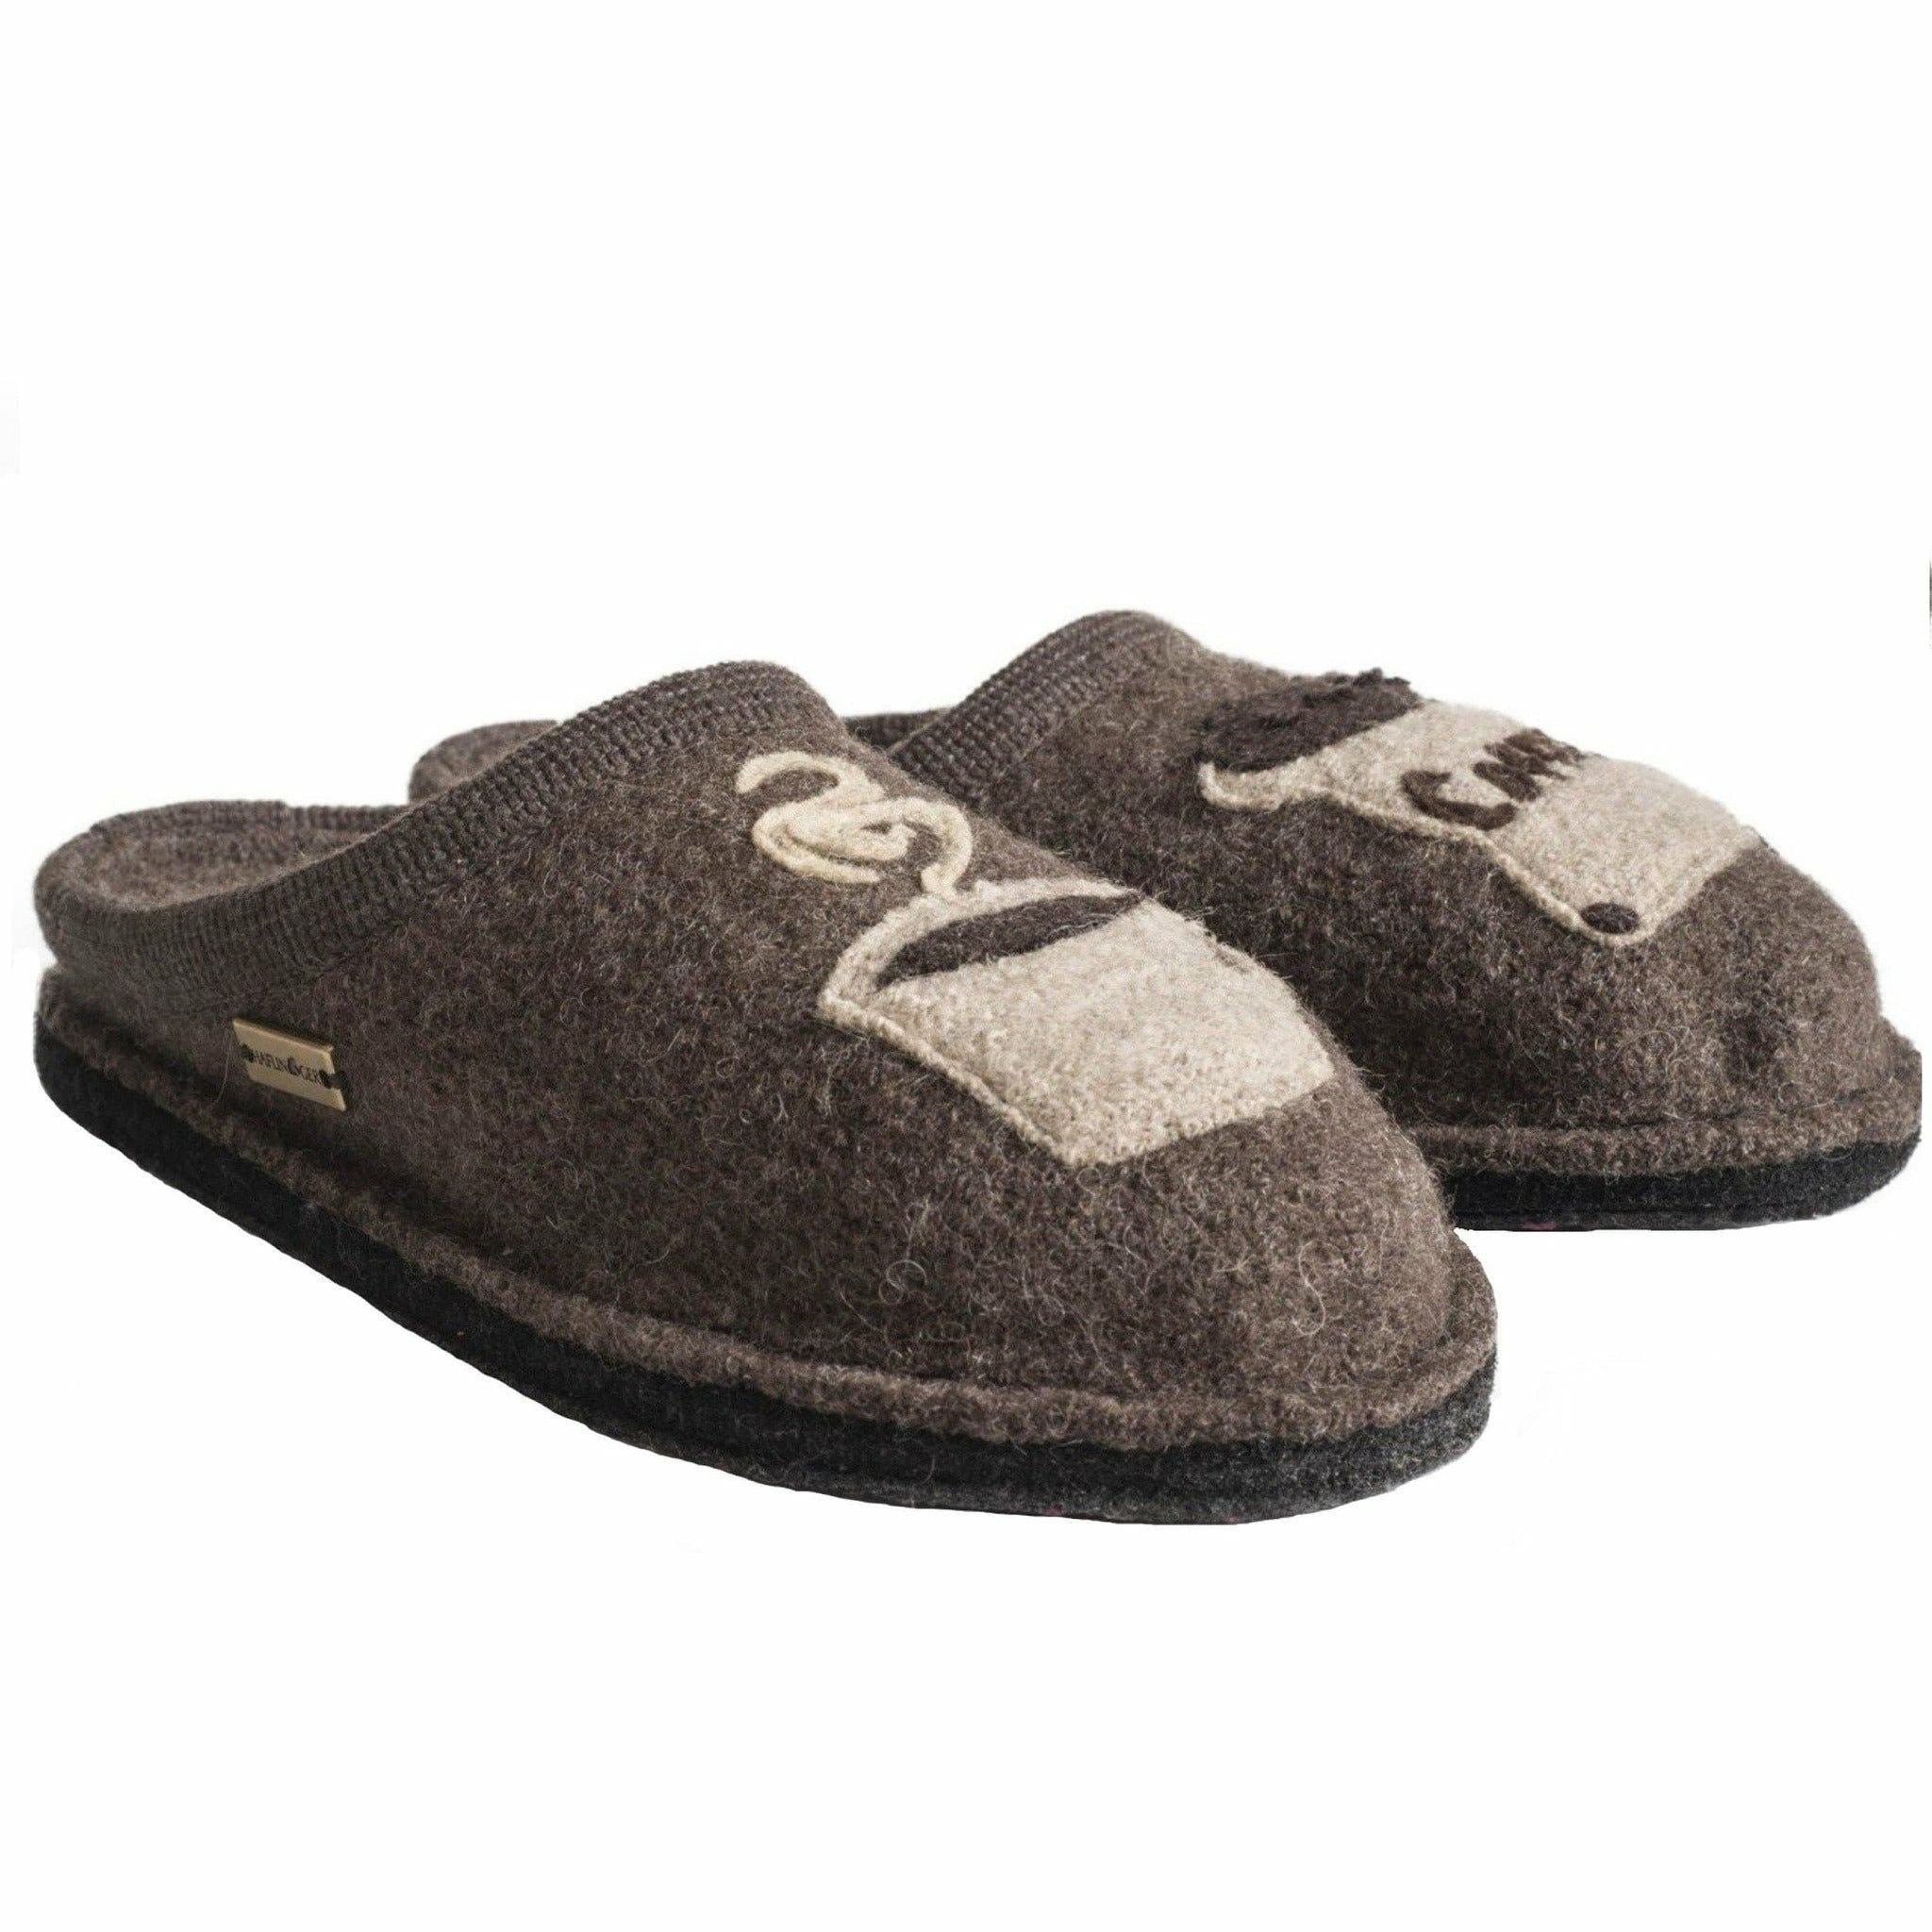 how to wash haflinger wool slippers